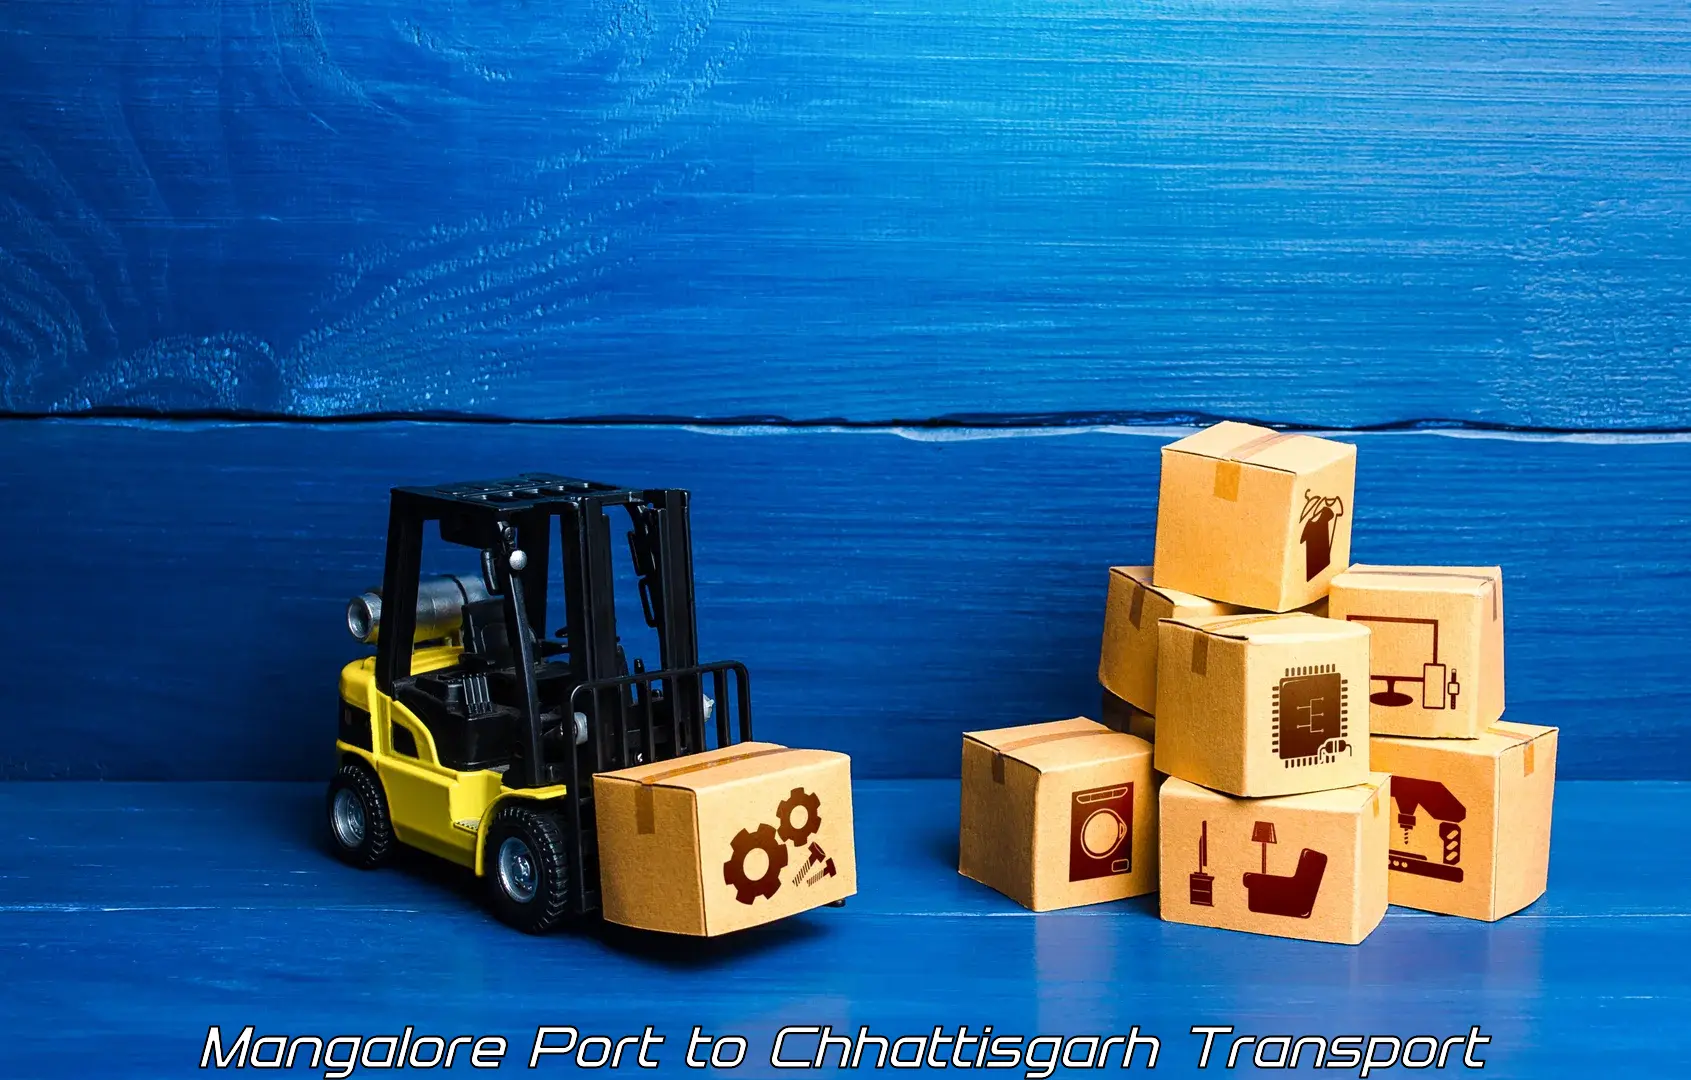 Part load transport service in India Mangalore Port to Dongargarh